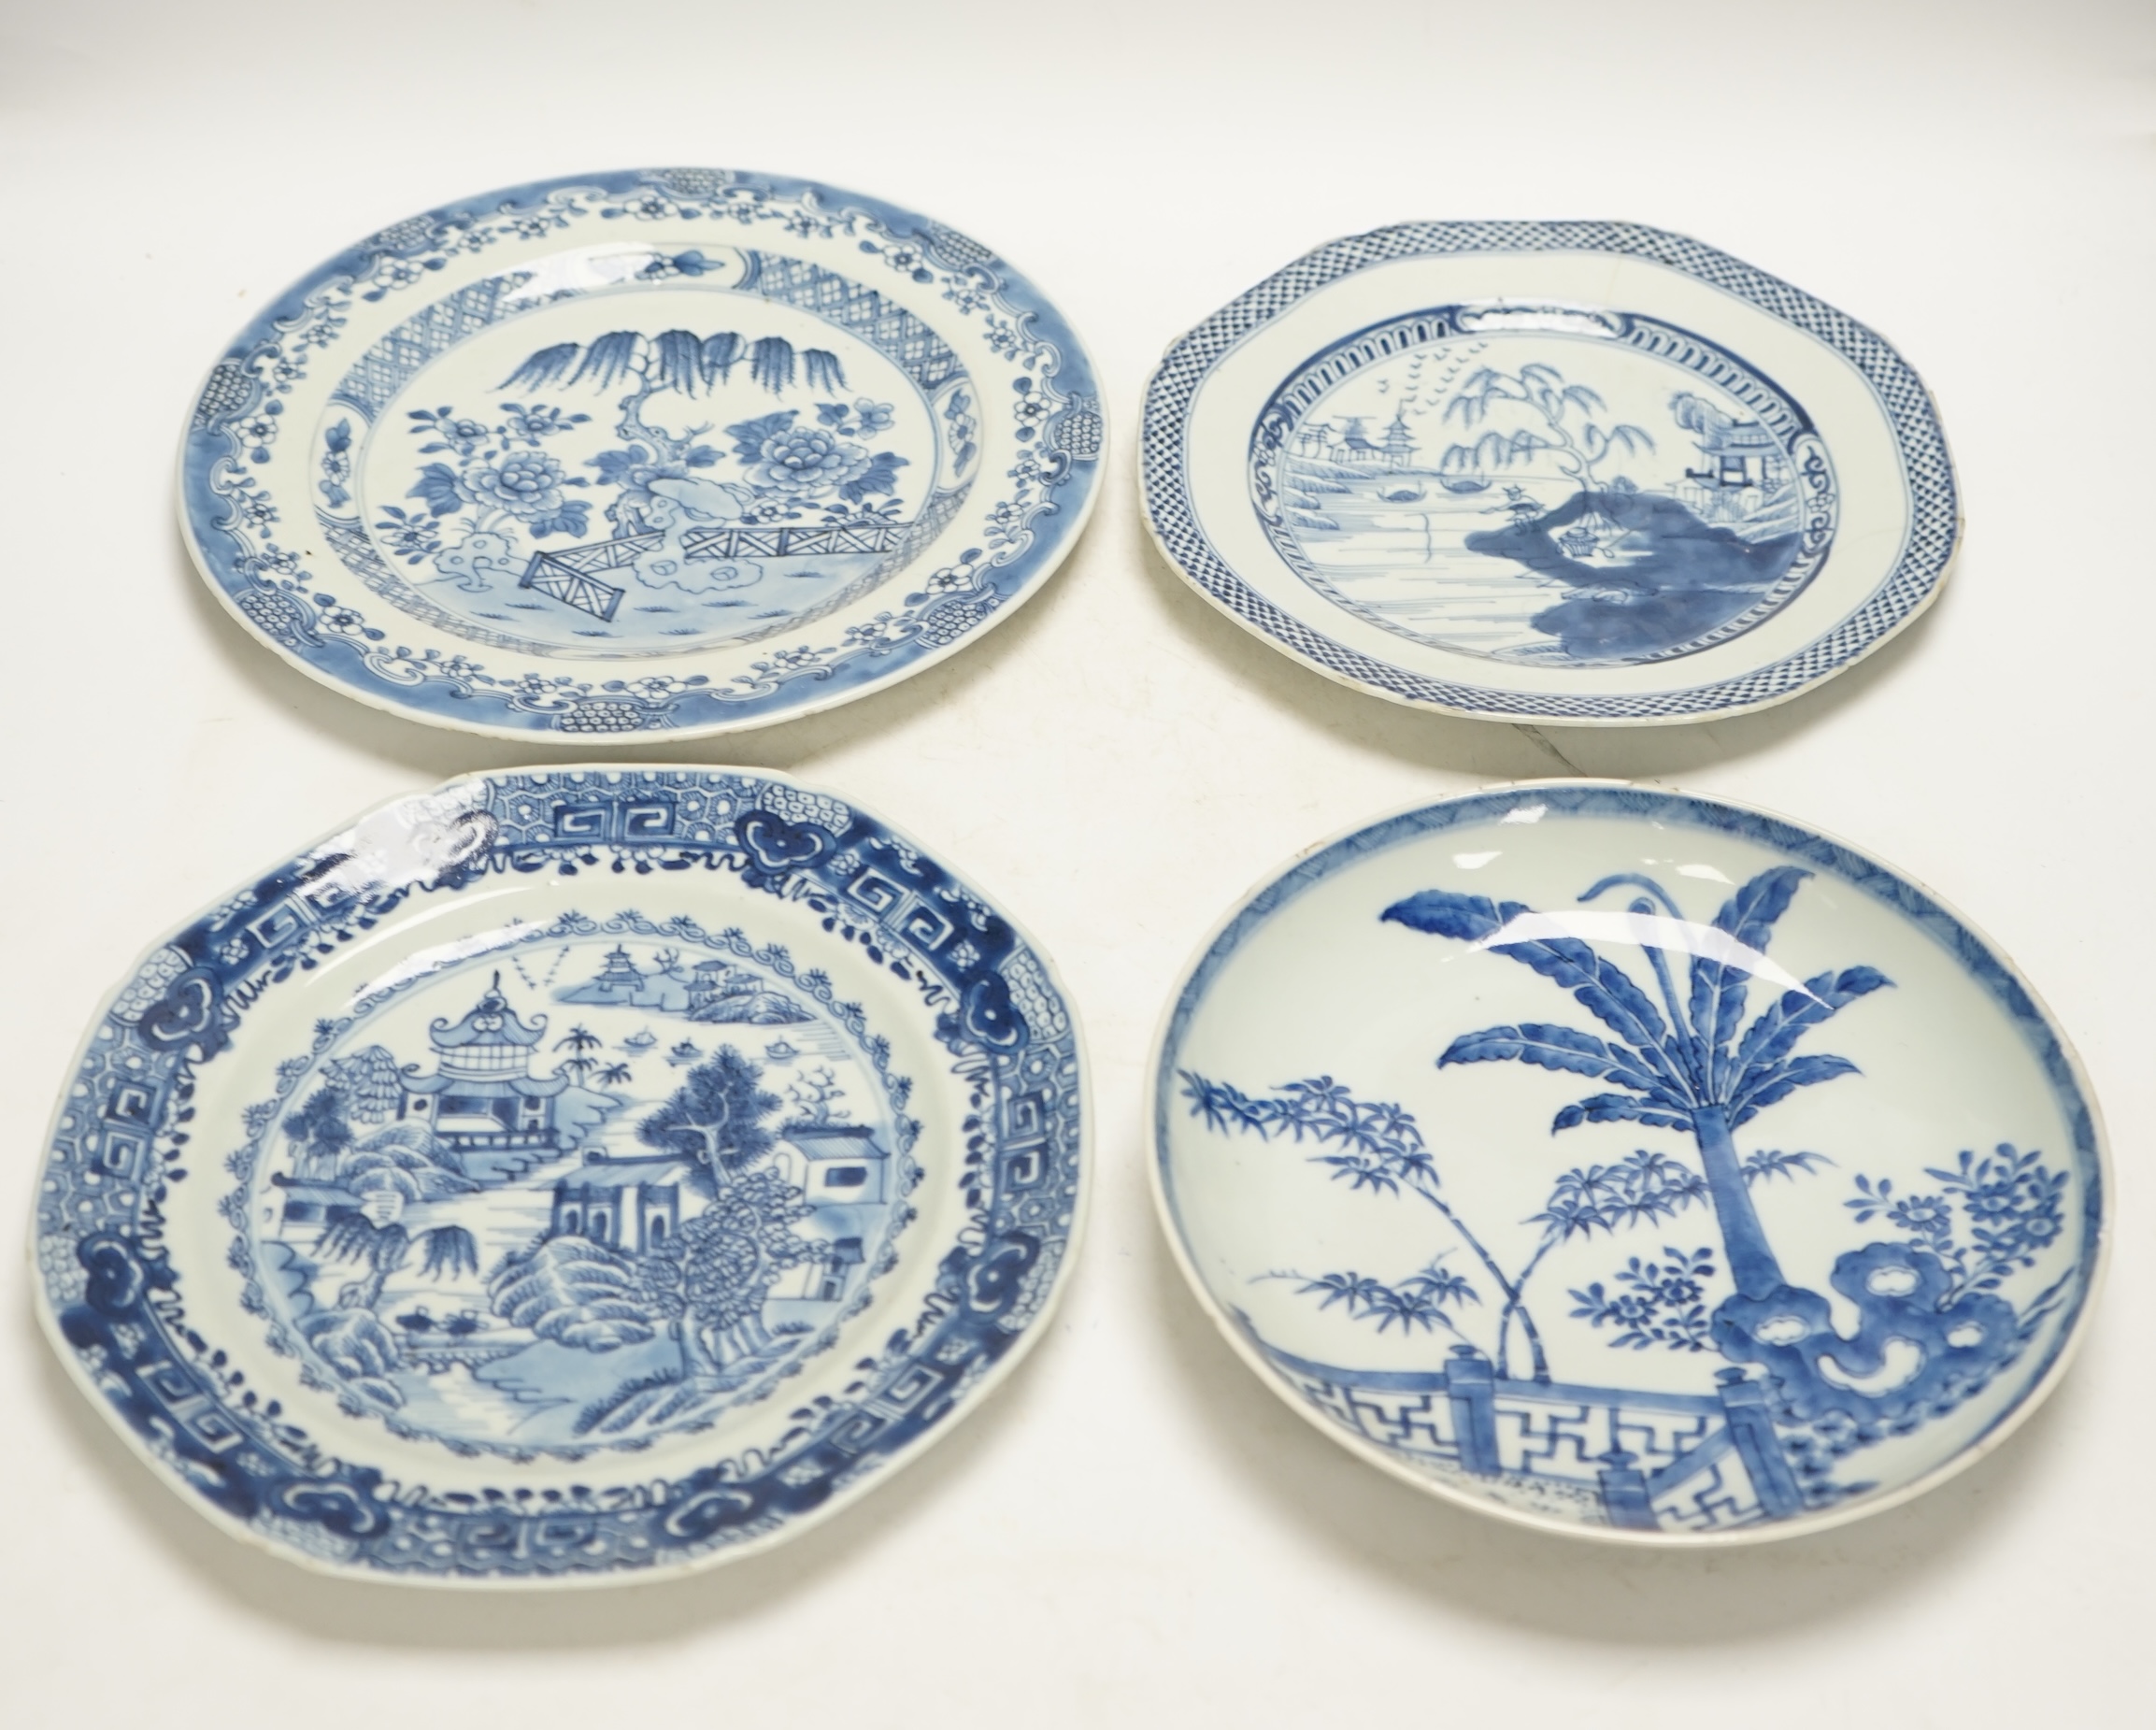 Four various Chinese export blue and white dishes, 18th/19th century, largest 26cm, largest 26cm diameter. Condition - one plate cracked, chips to another